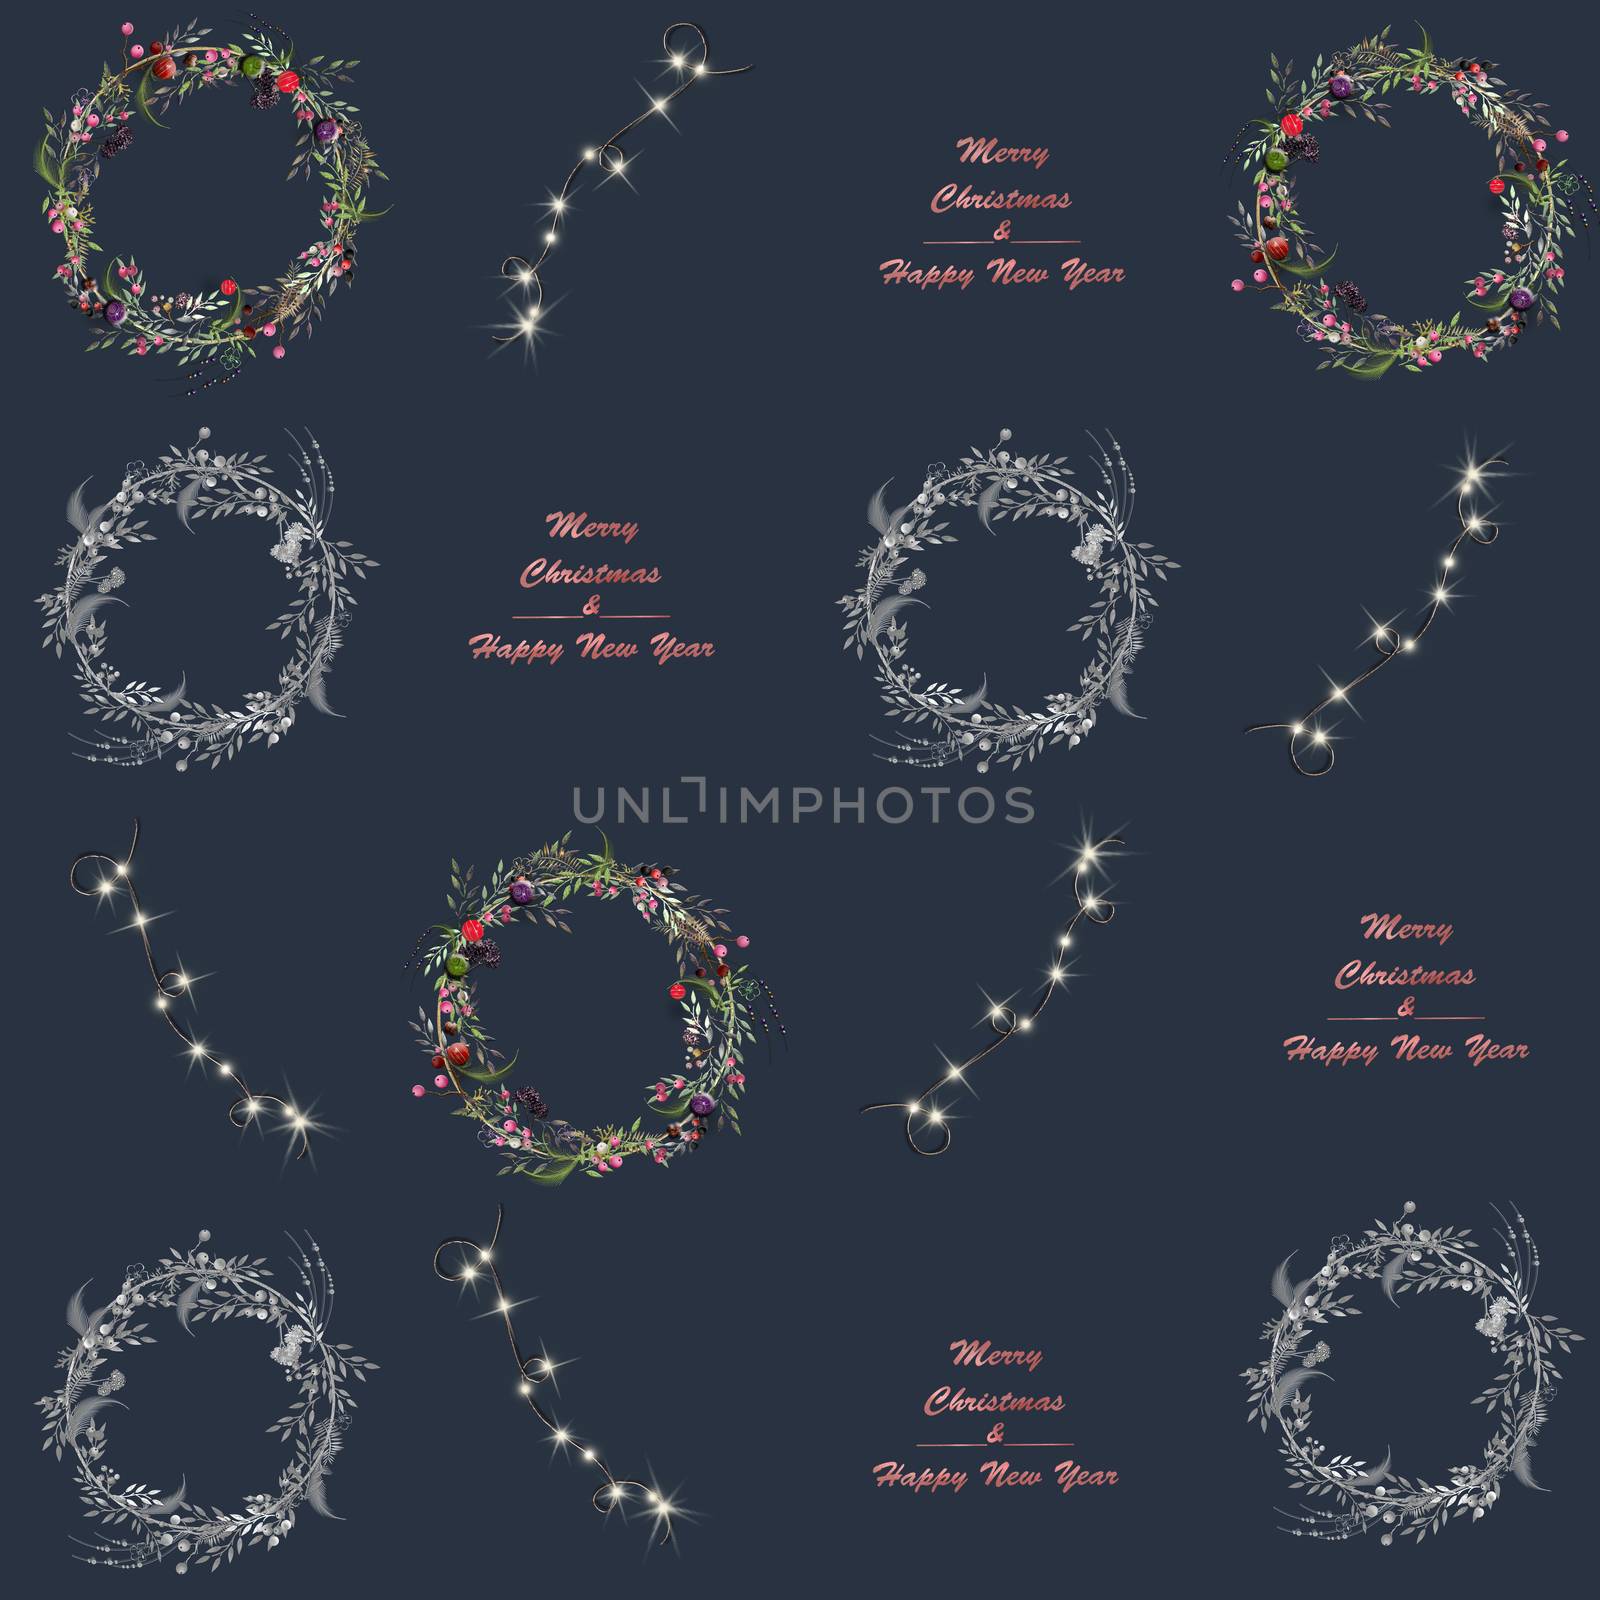 Christmas seamless pattern, festive wreath, lights on blue background. Gold text Merry Christmas Happy New Year. 3D illustration. Nature design. Season greeting. Winter Xmas holidays